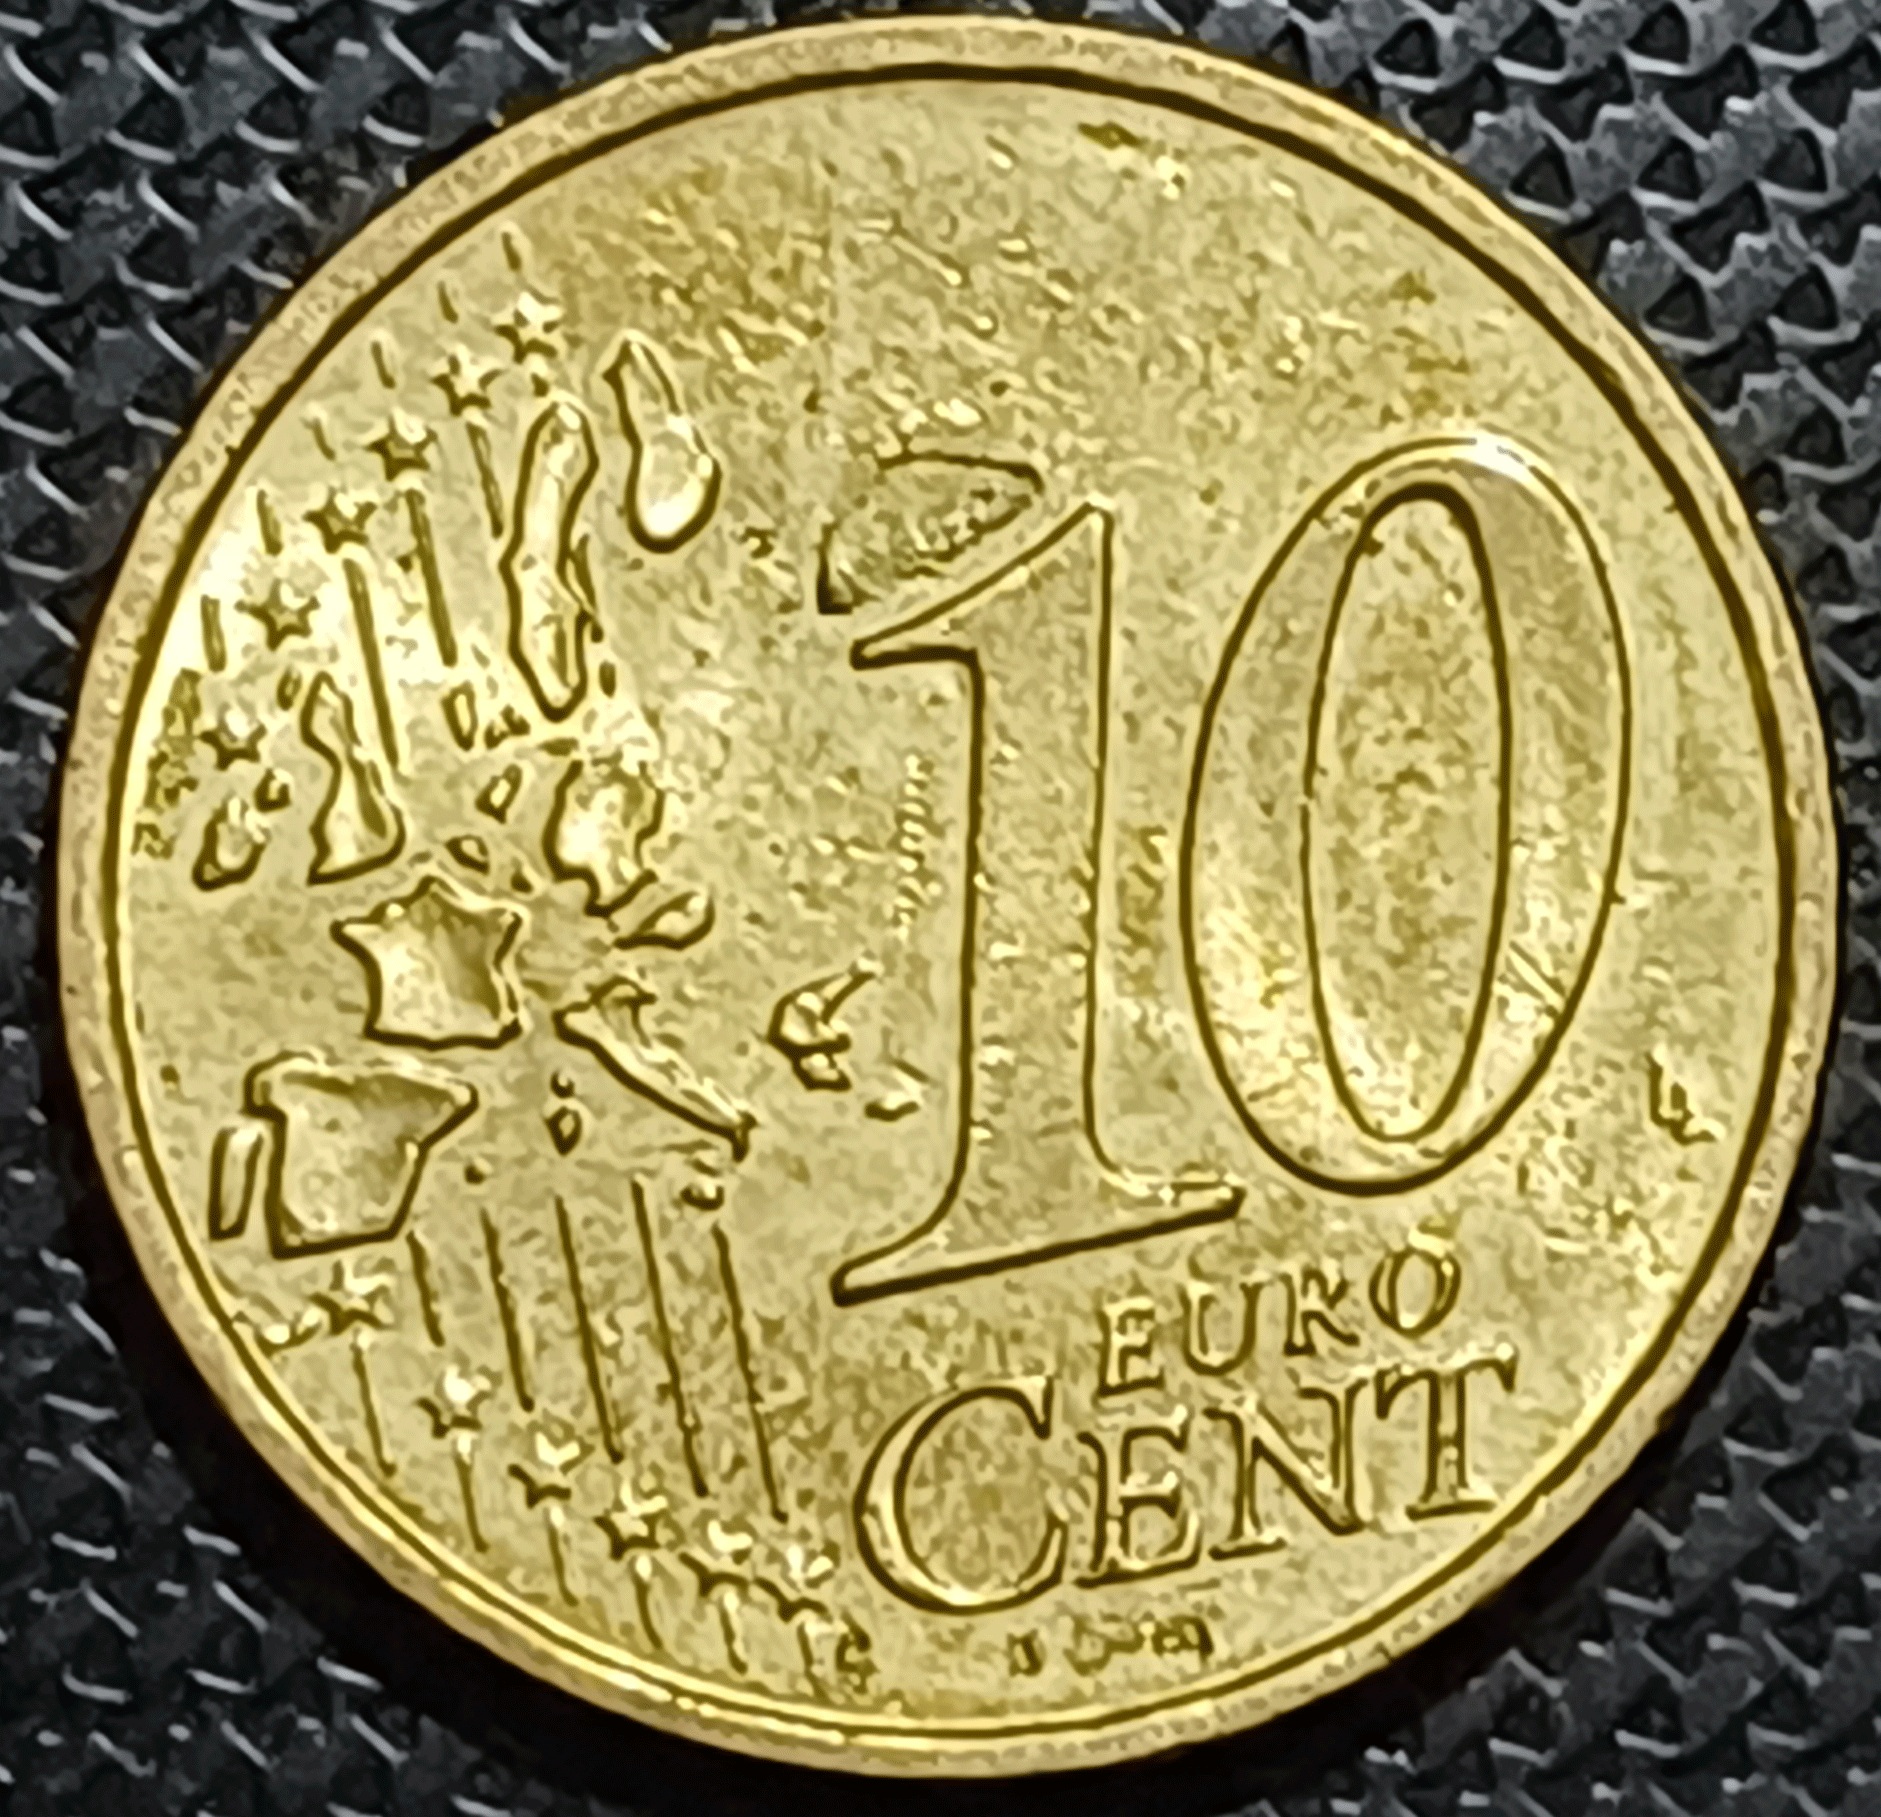 GERMANY 10 EURO CENT COIN - The Brandenburg Gate, symbol of the